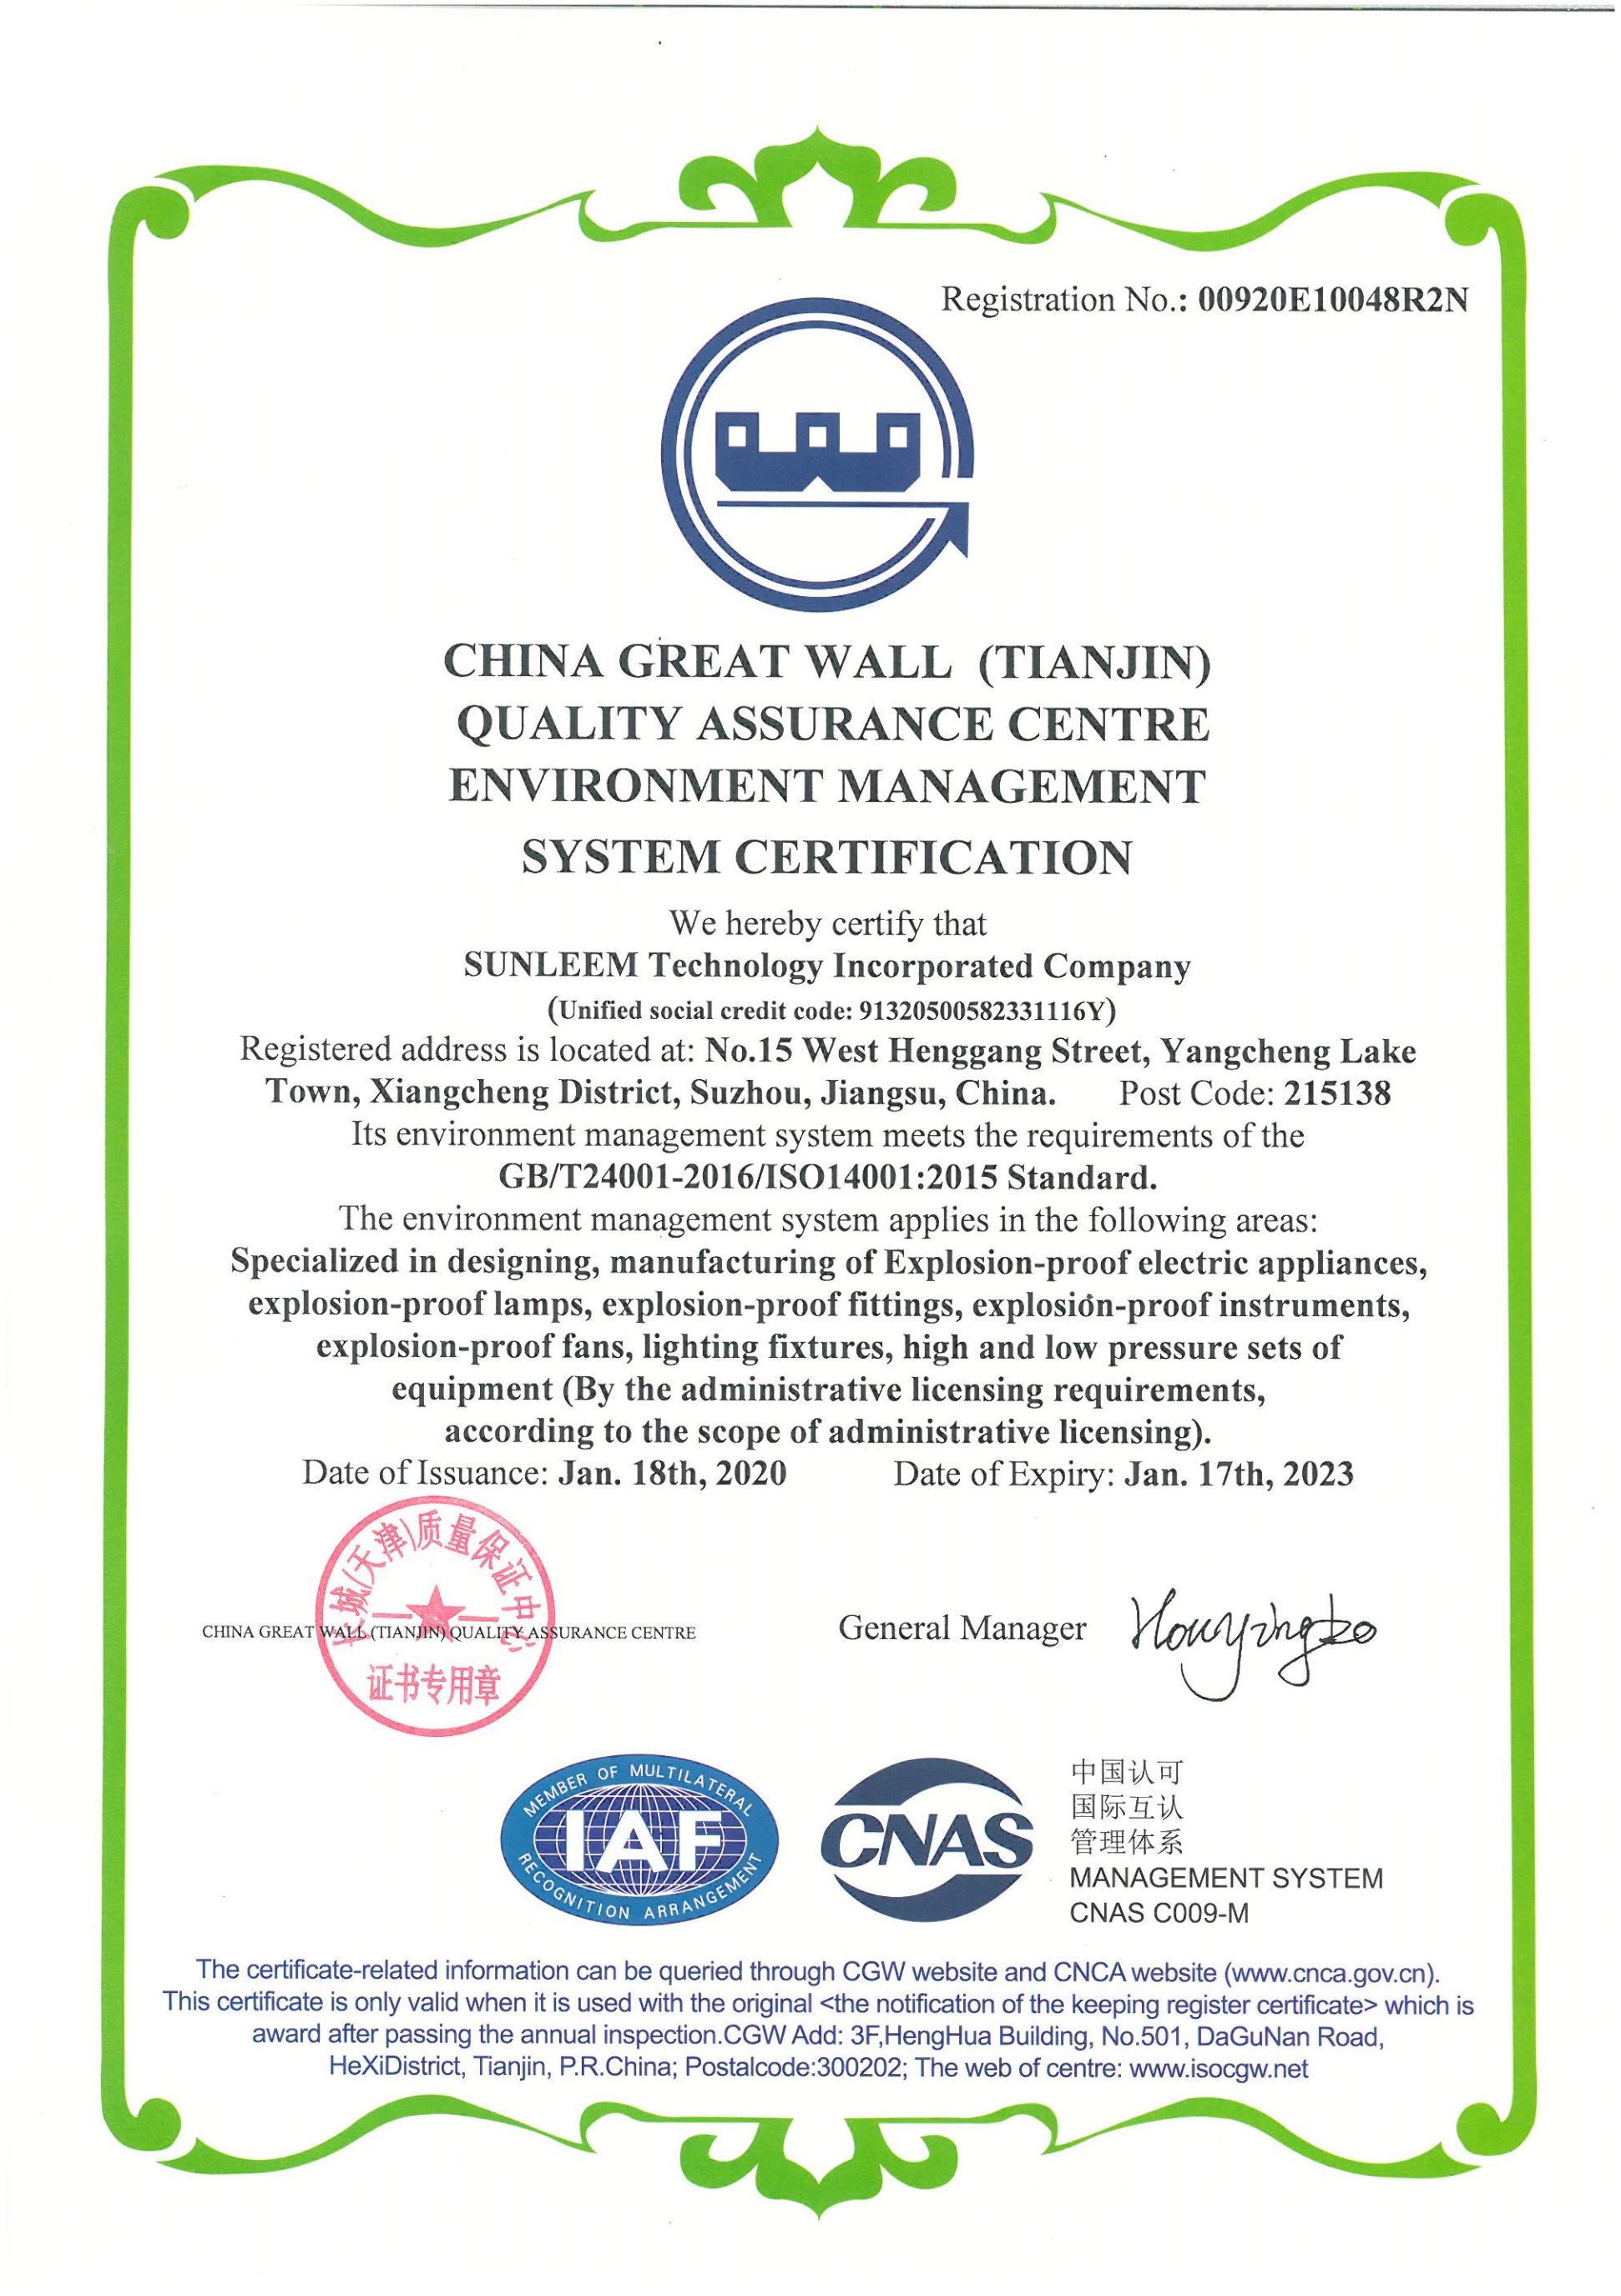 ENVIRONMENT MANAGEMENT SYSTEM CERTIFICATE